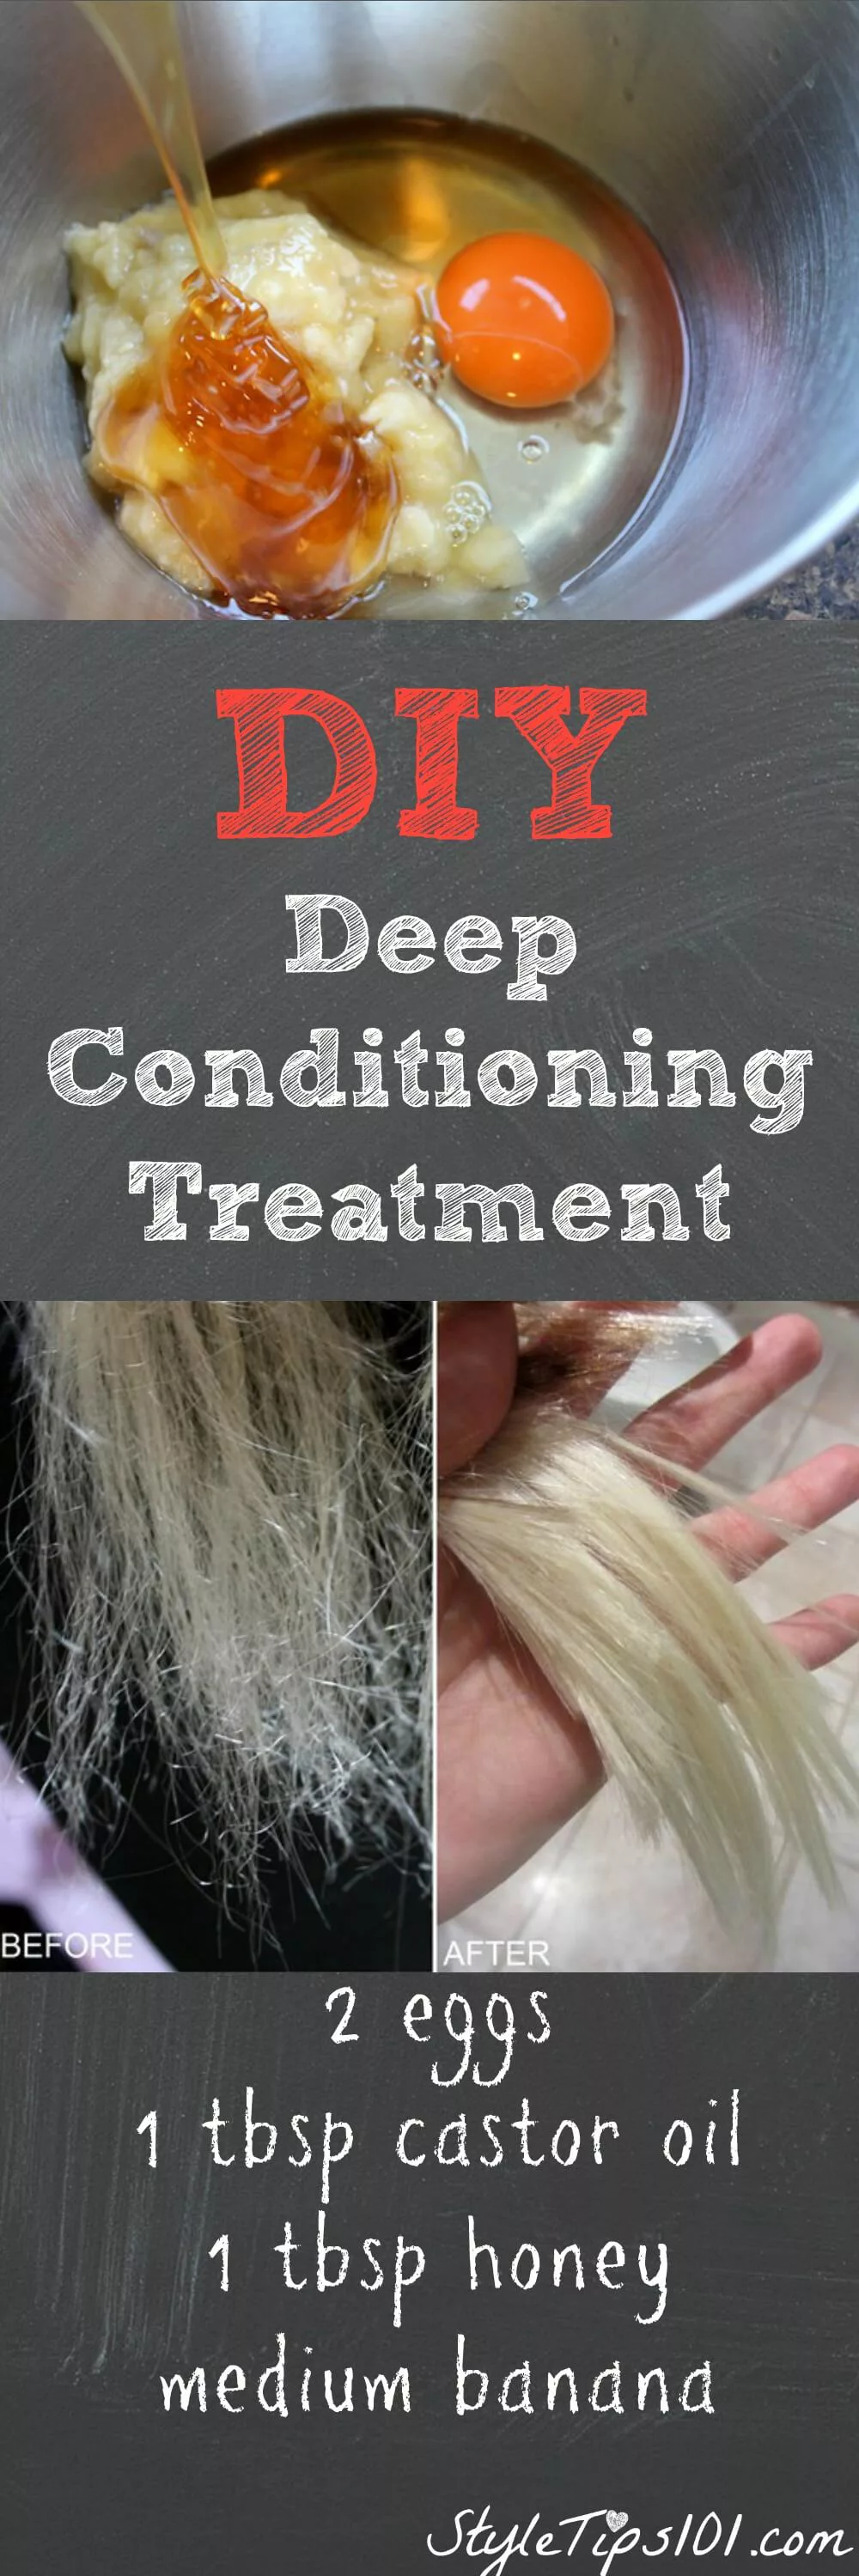 DIY Deep Conditioning Treatment With Egg and Castor Oil